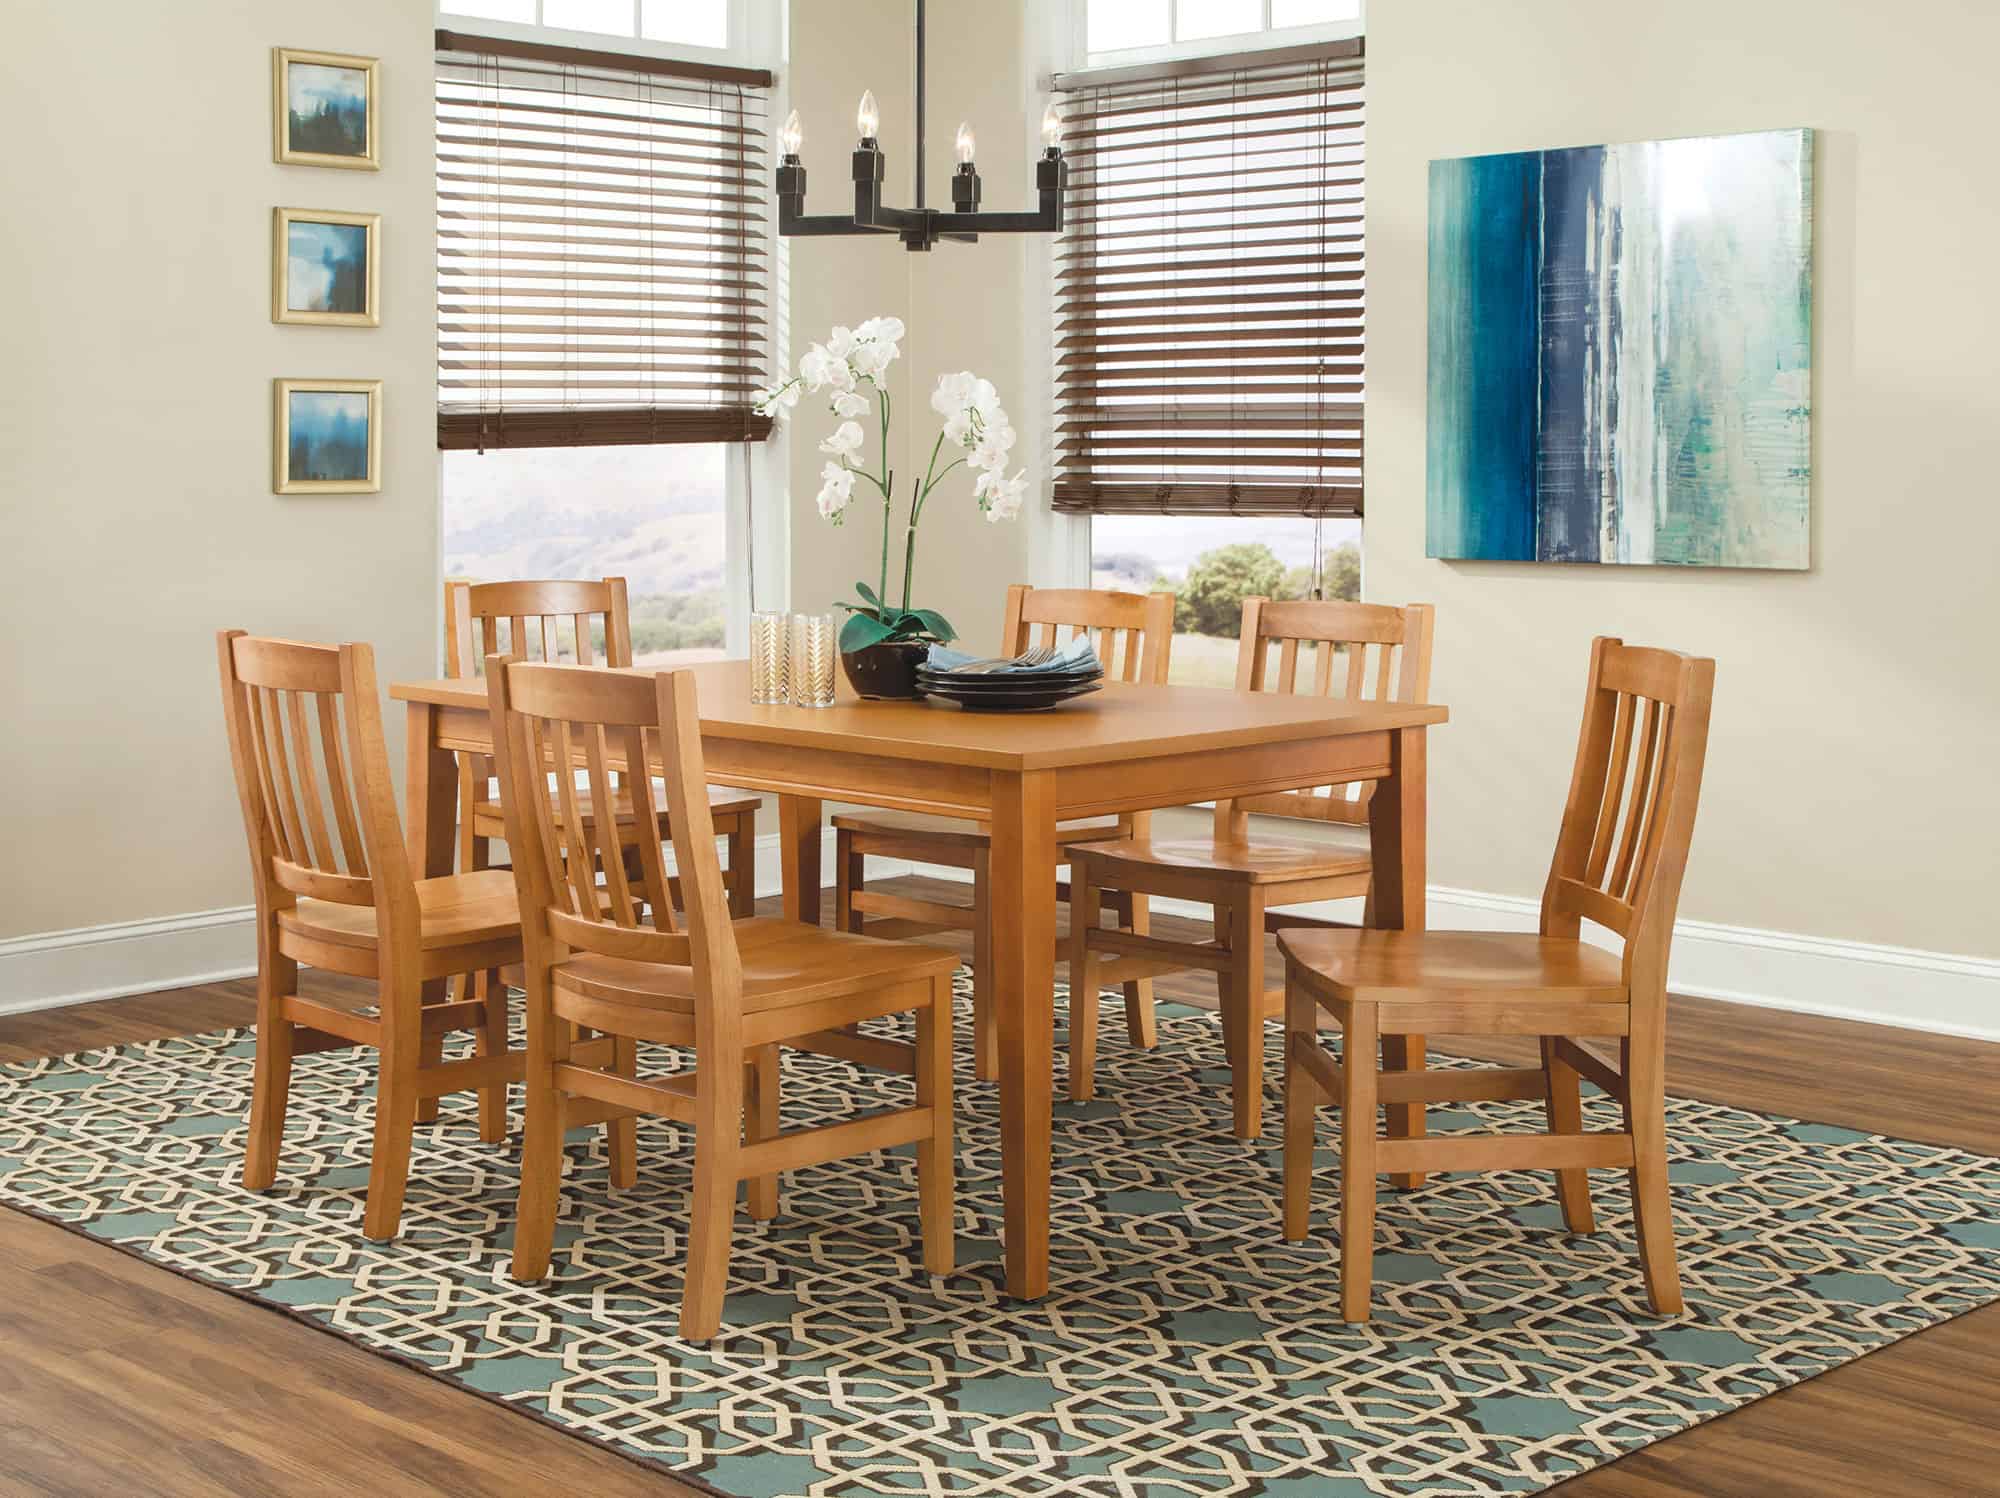 Dalton Collection being shown in a dining room